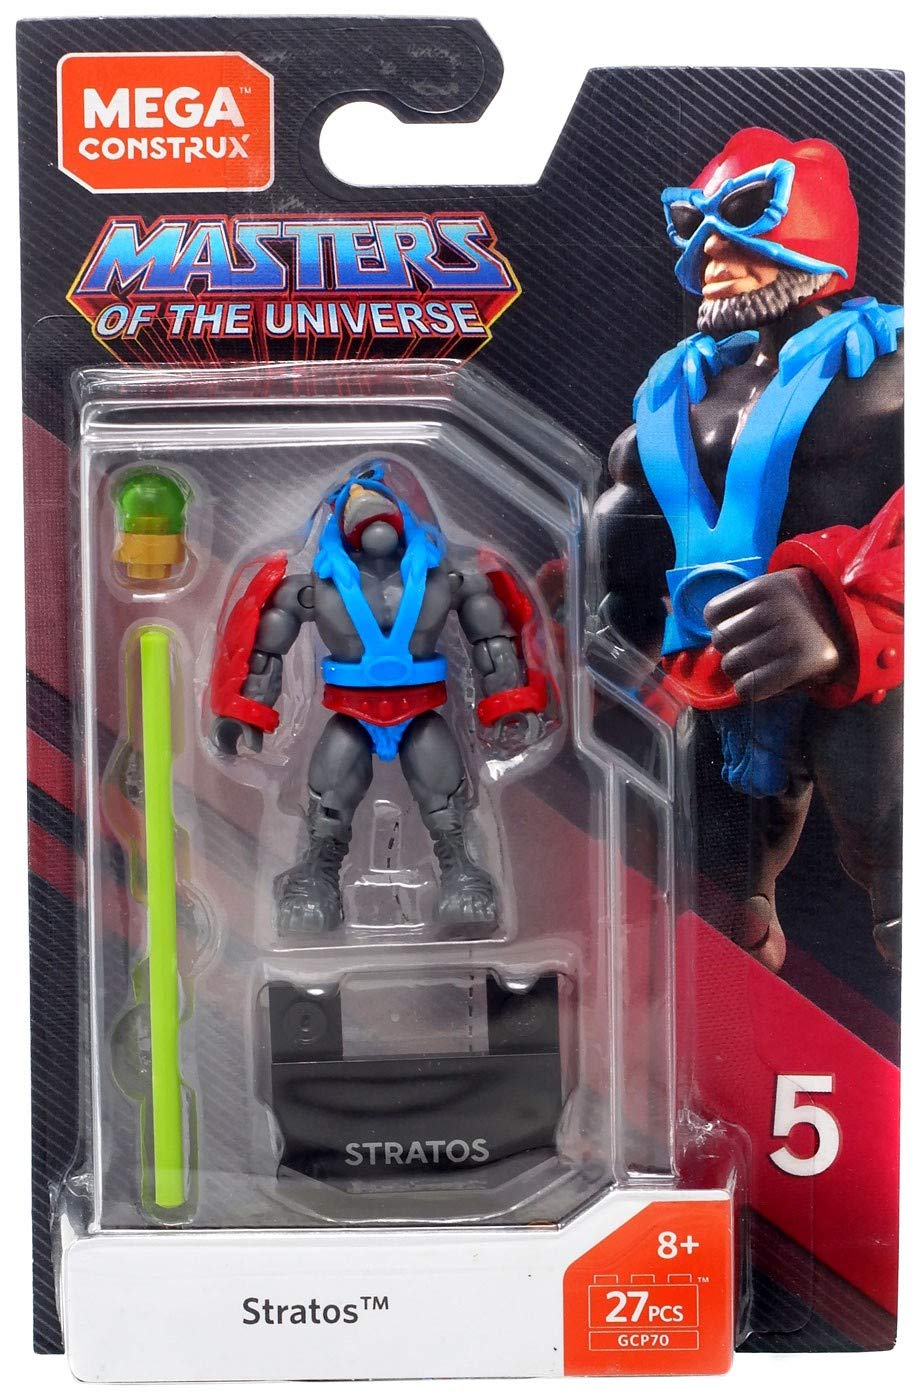 Stratos - Mega Construx Masters of the Universe Series 5 Figure Pack